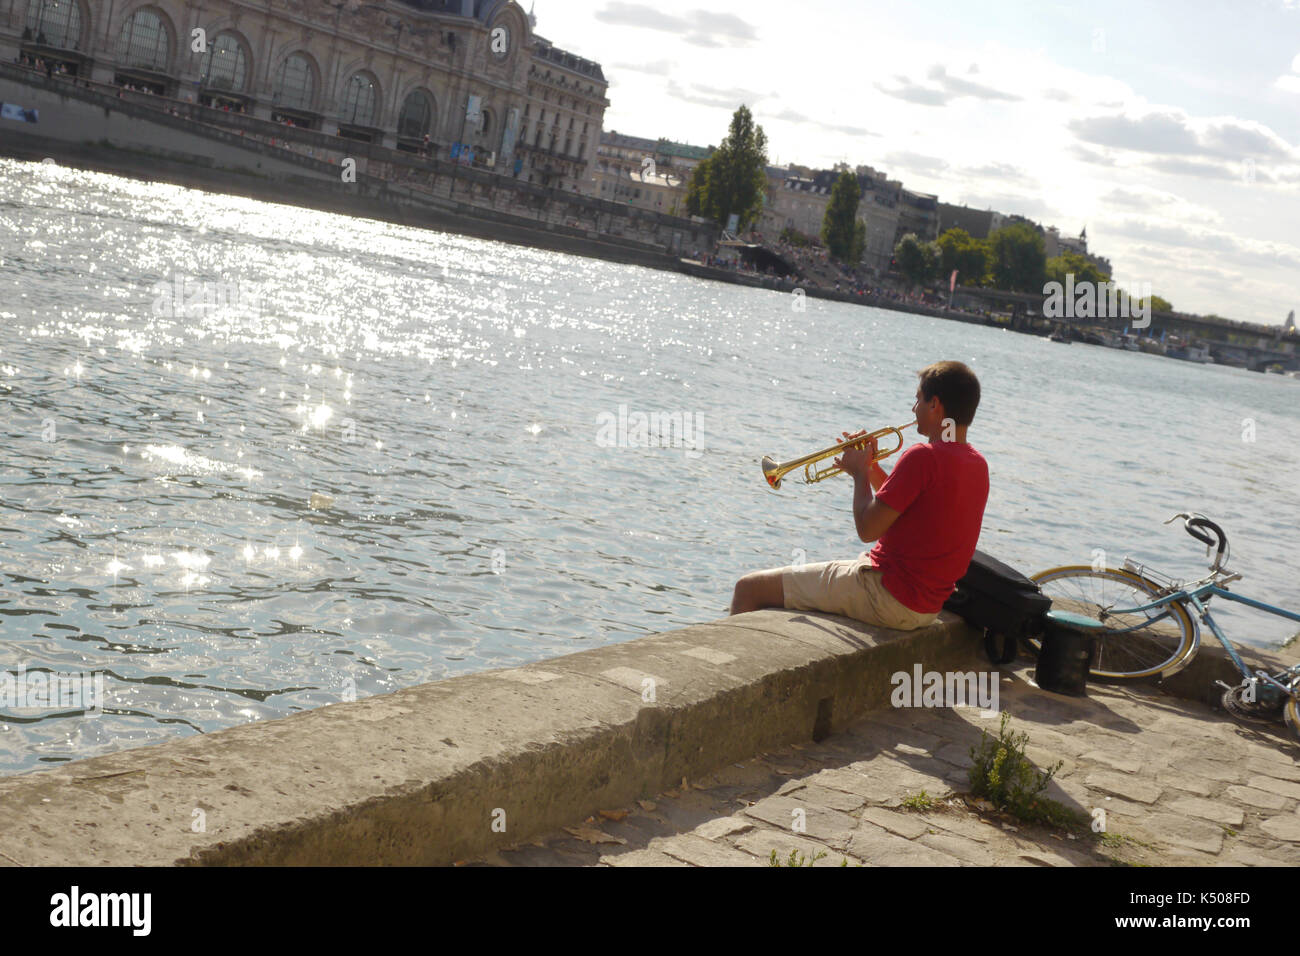 A man in a red t shirt practices the trumpet whilst sitting on the banks of the river Seine in Paris France.Summer time in the city. Stock Photo